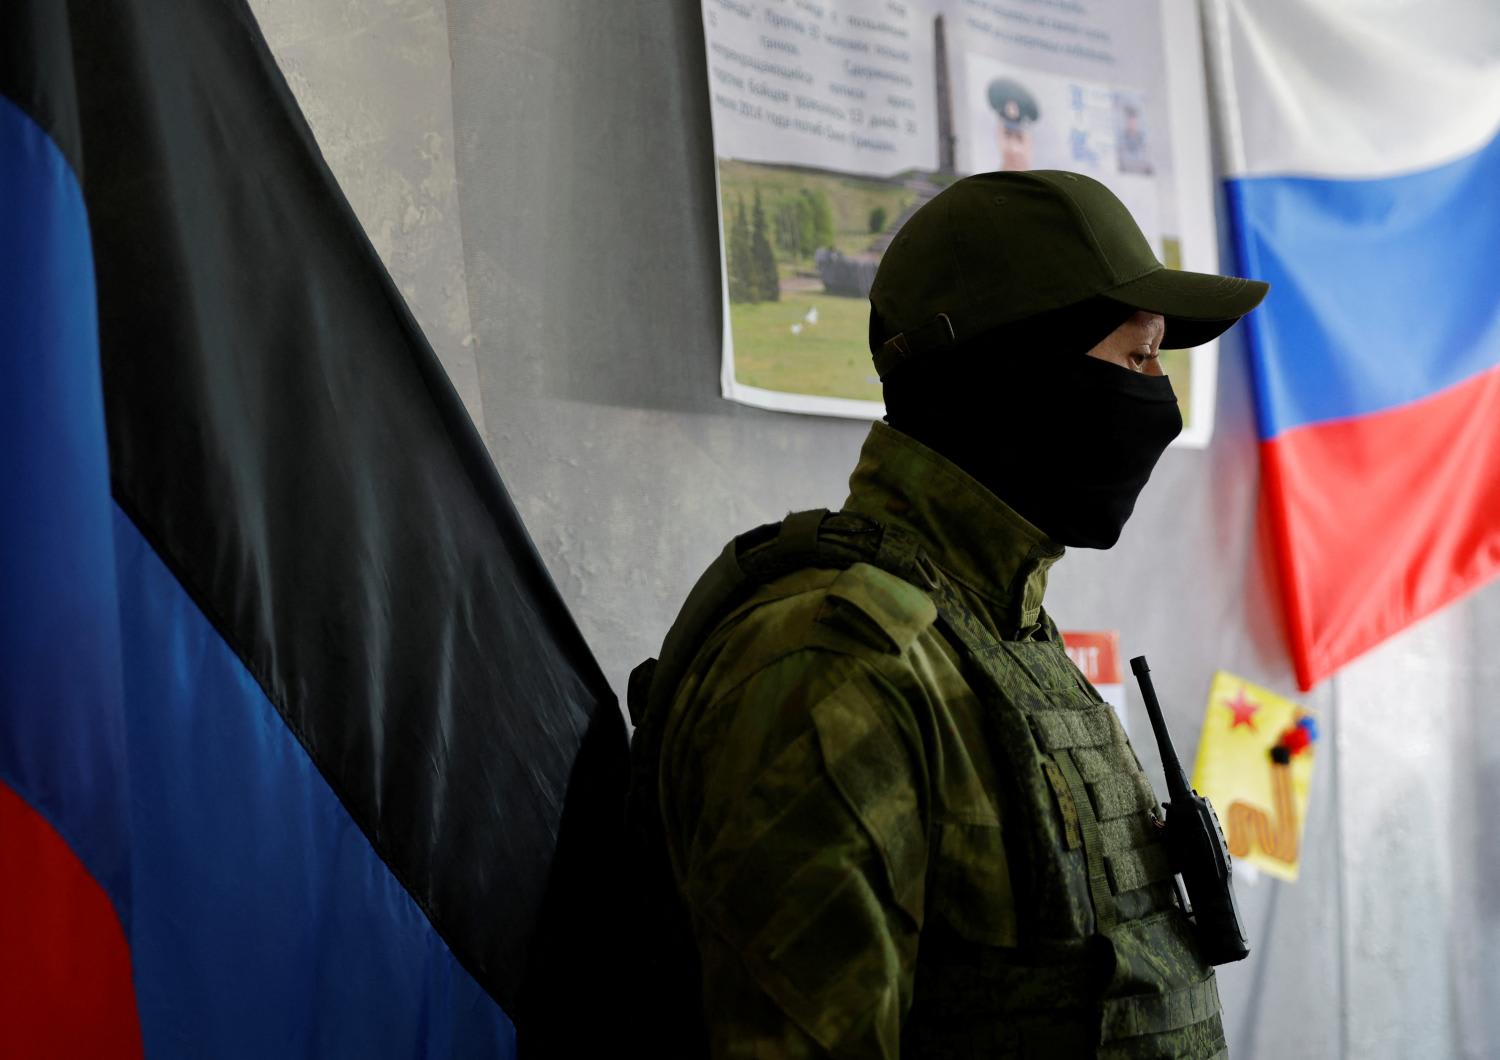 A service member of the self-proclaimed Donetsk People's Republic stands guard at a polling station ahead of the planned referendum on the joining of the Donetsk people's republic to Russia, in Donetsk, Ukraine Sept 22, 2022.